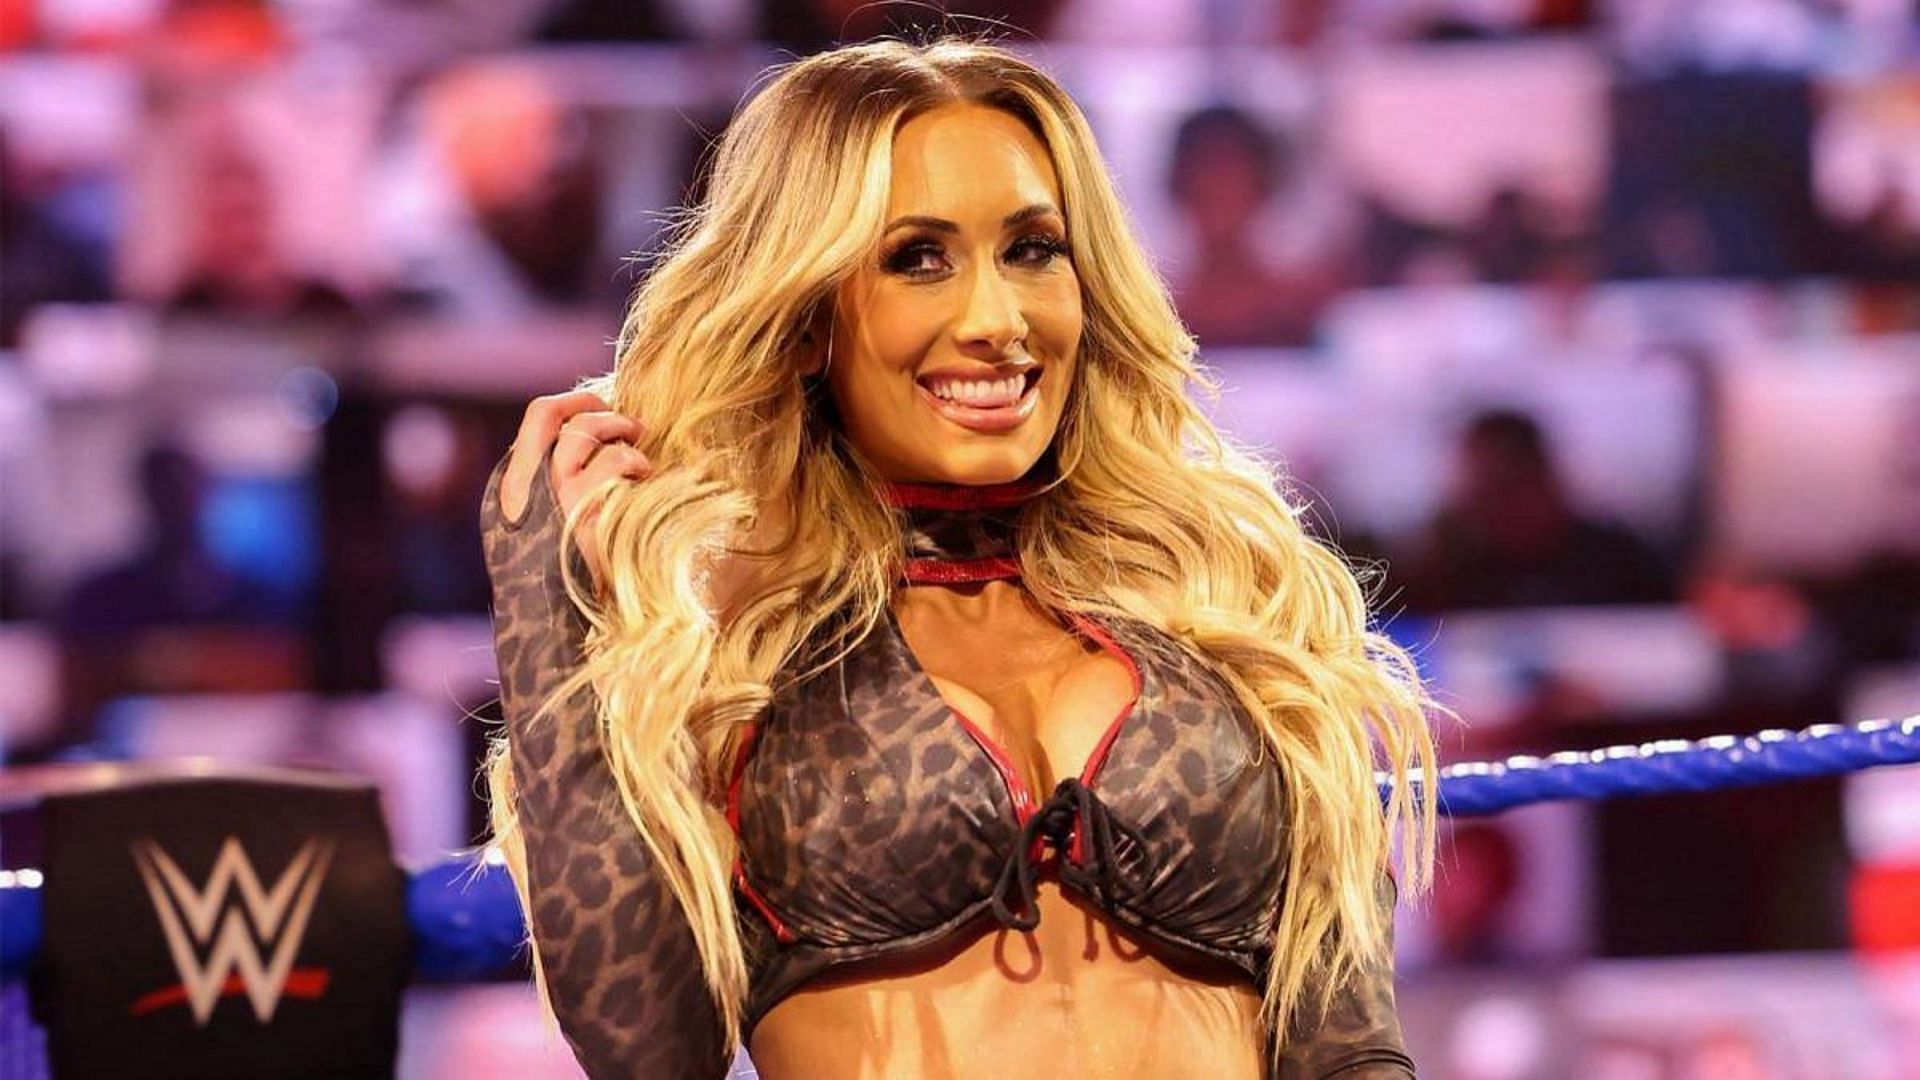 Carmella is not allowed to change her hair color